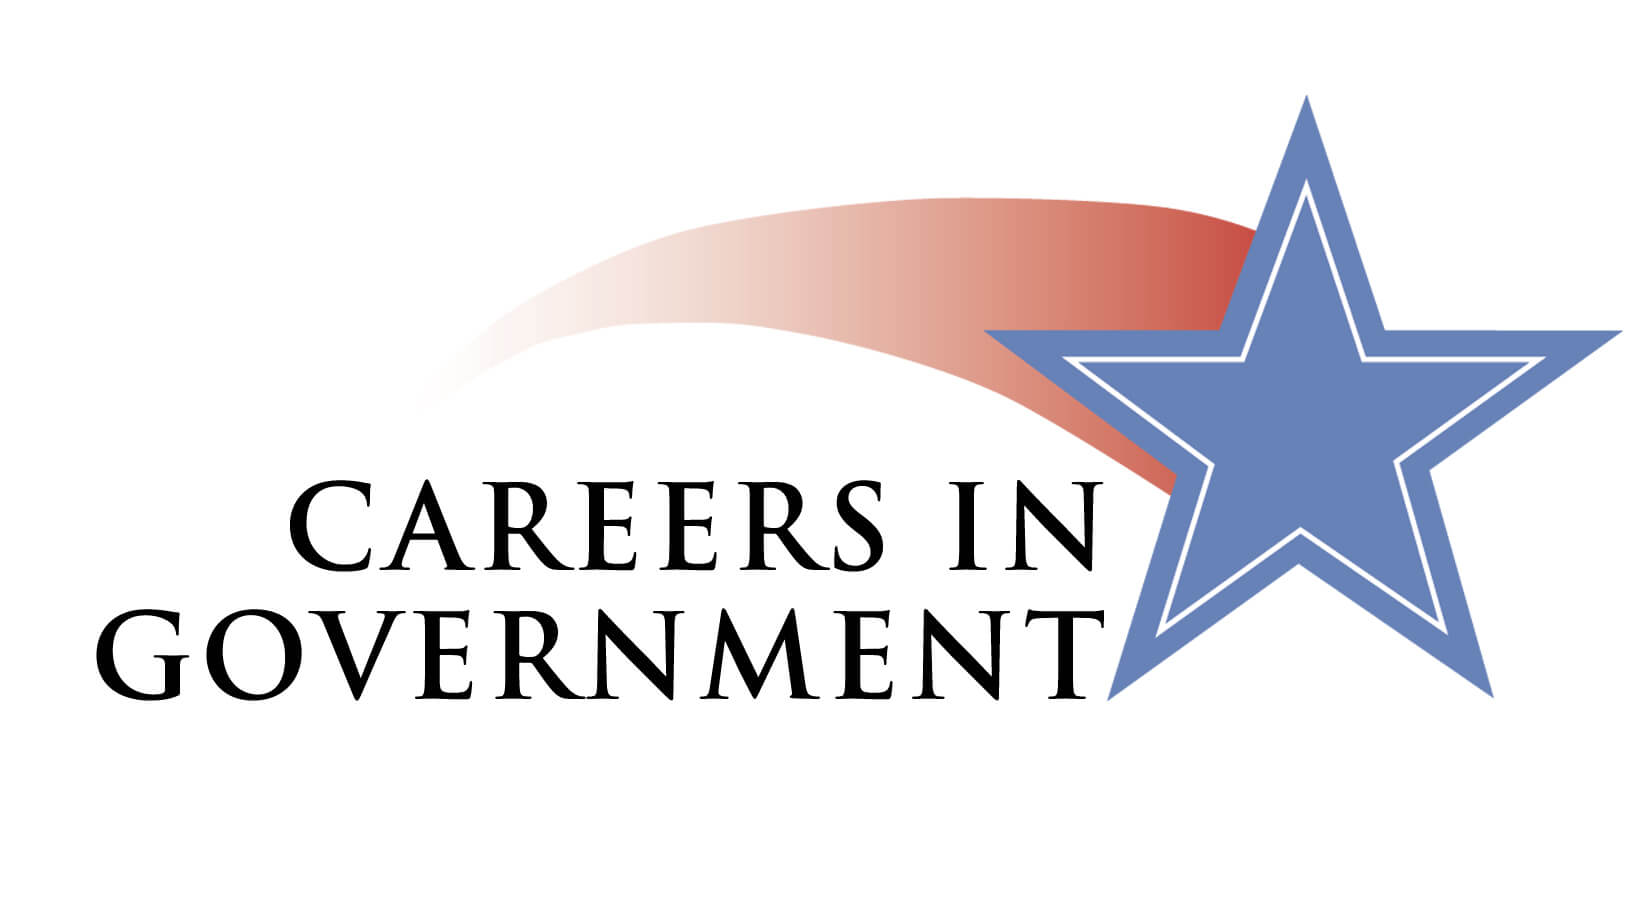 Careers in Government Named 2016 Innovator of the Year